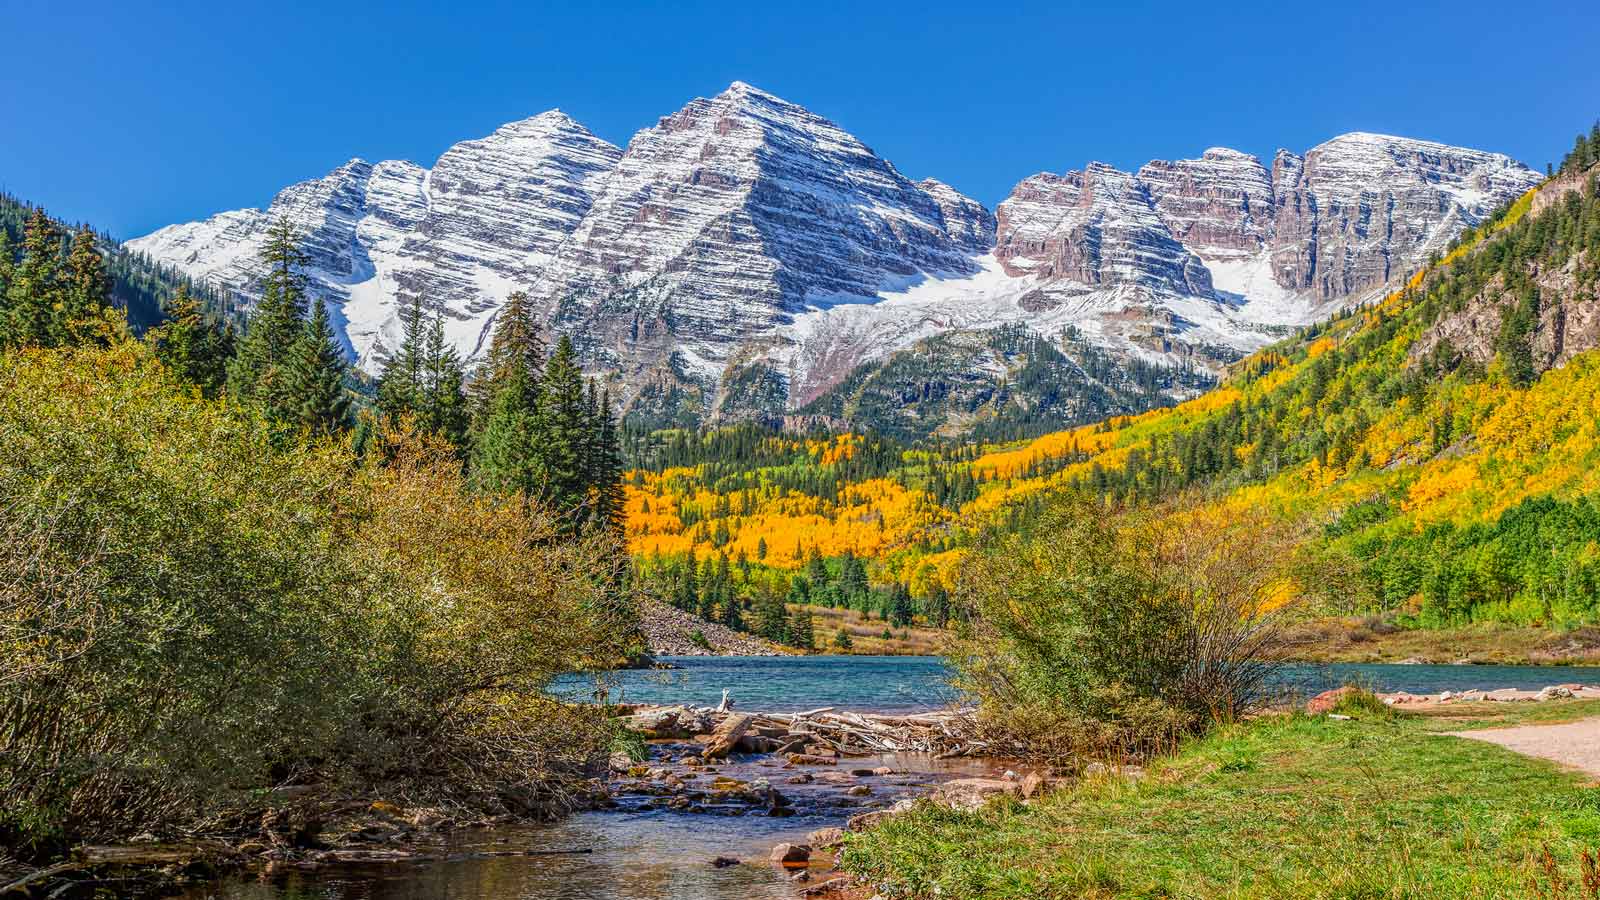 <p>Most people think of Colorado as a winter destination. After all, those snow-capped mountains are primed for skiing and snowboarding – but it’s a great place to visit at any time of year.</p><p>During the fall, in particular, the state is filled with golden yellows and rusty oranges thanks to the changing leaves and chilling temperatures.</p><p>The <a href="https://thehappinessfxn.com/how-to-visit-colorado-maroon-bells/">Maroon Bells</a> are one of the best places to see fall colors in Colorado. With the fire-colored leaves, striking mountain peaks, and mirroring lake, it’s picture-perfect.</p>